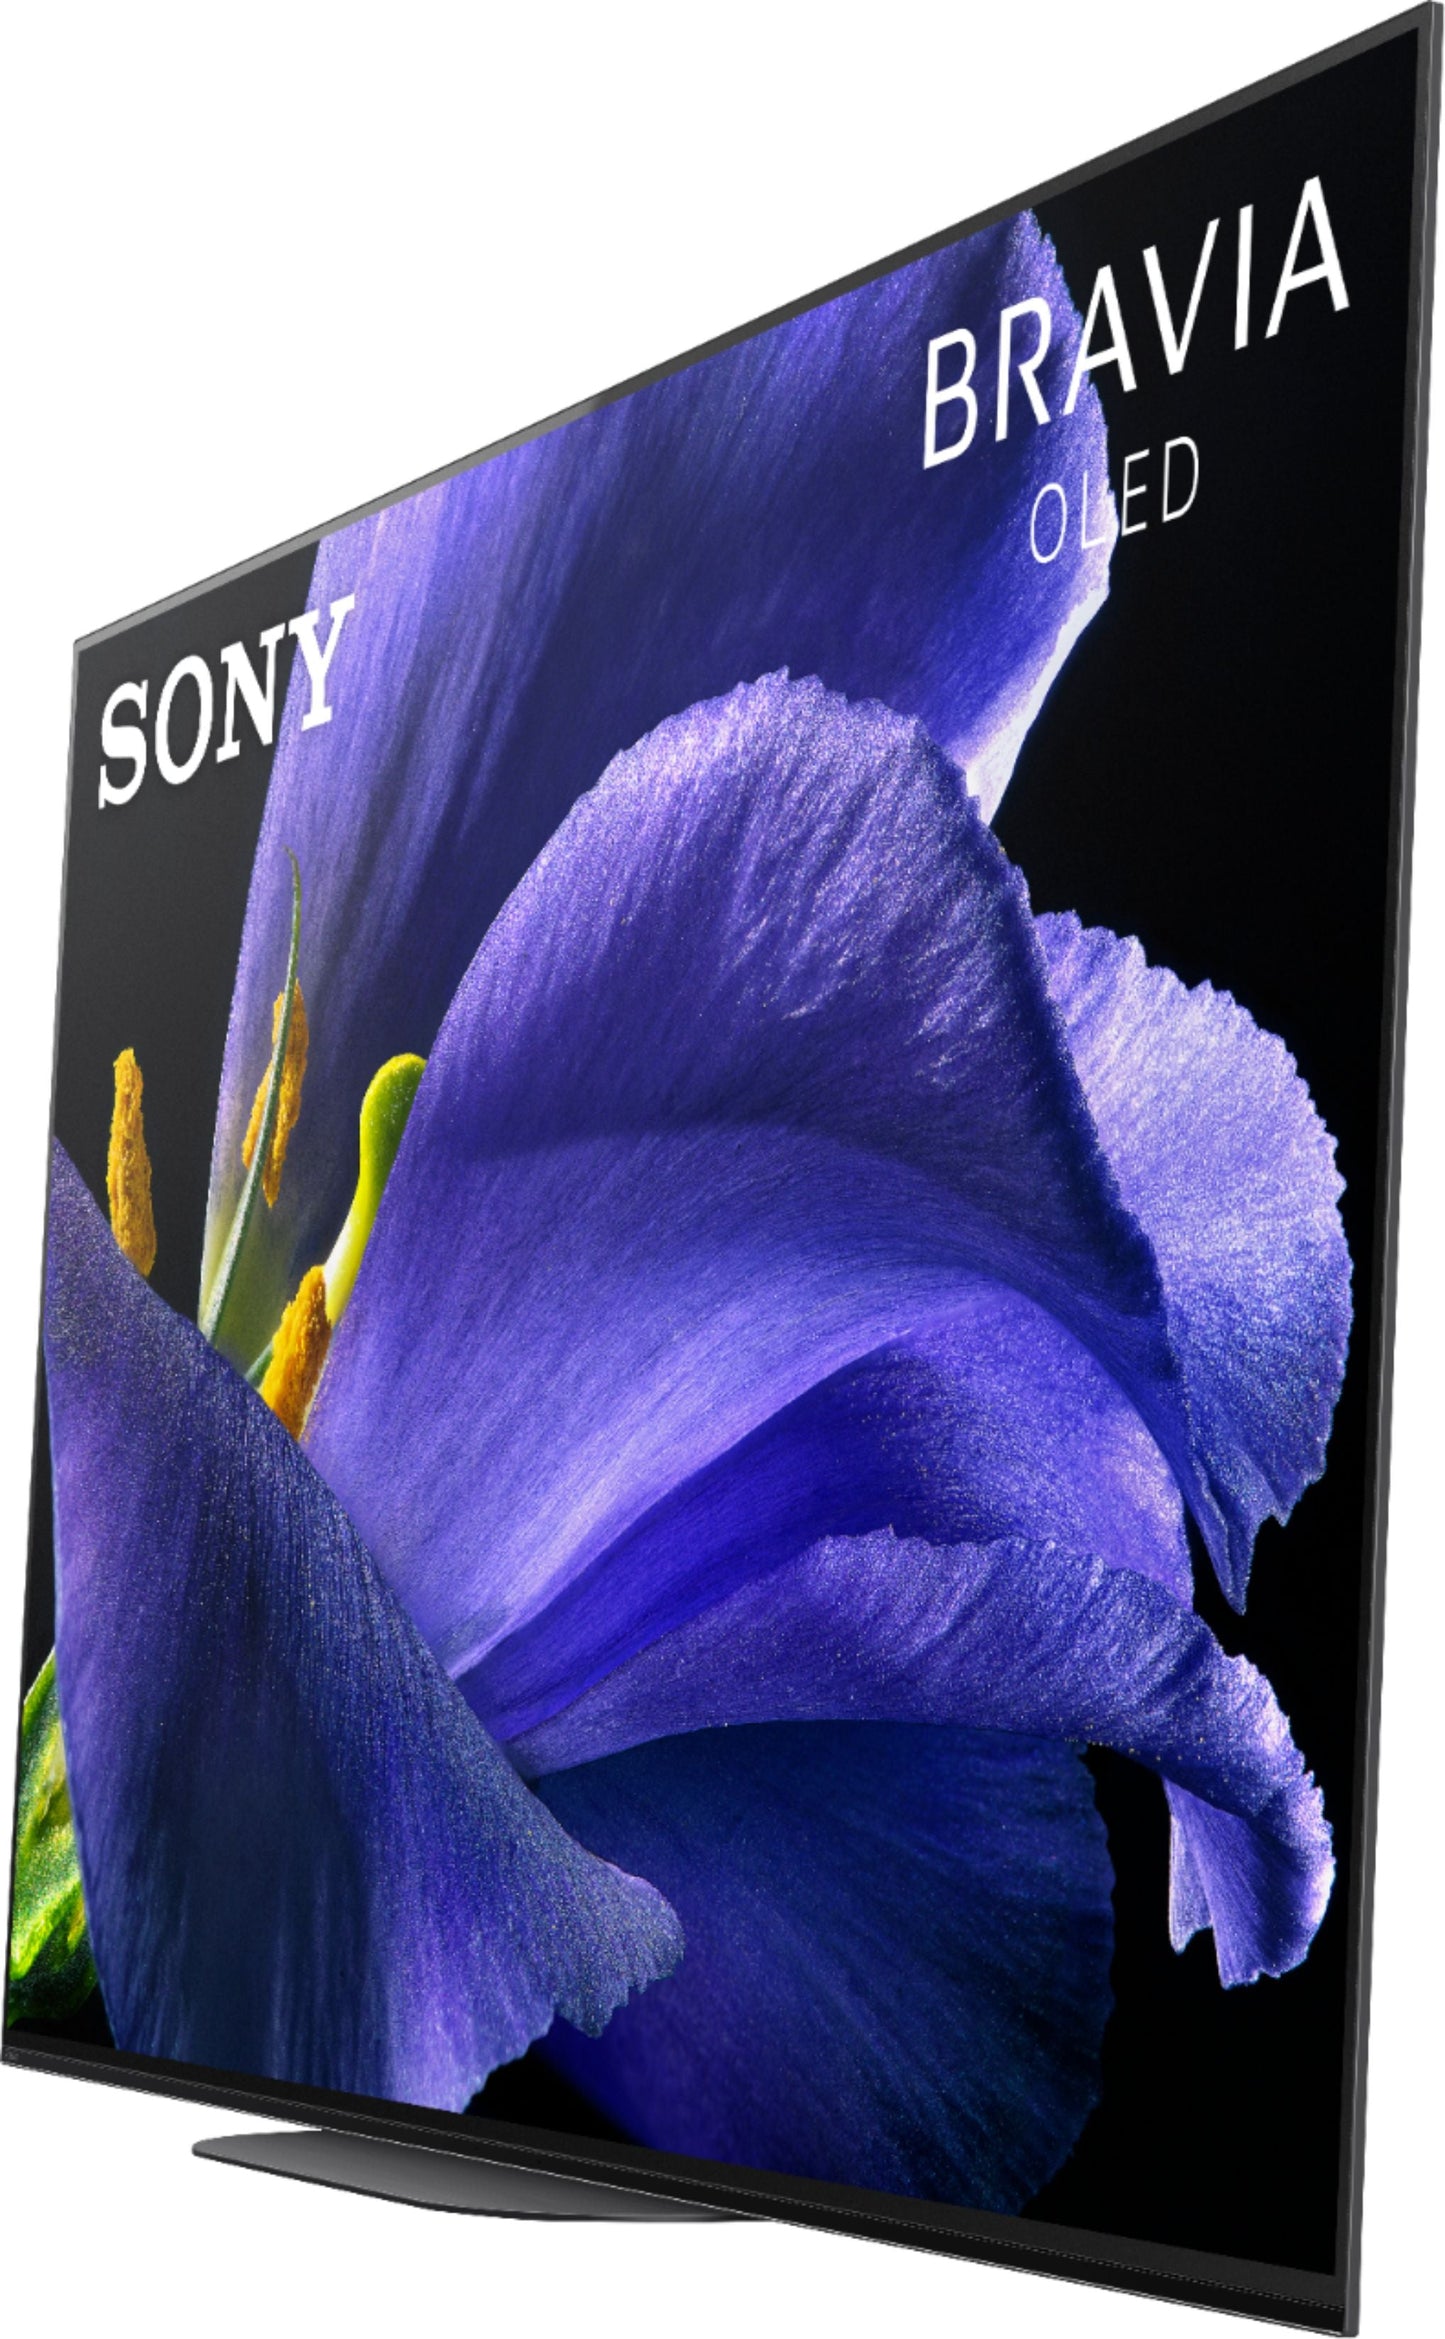 Sony MASTER A9G 65" Class HDR 4K UHD Smart OLED TV XBR65A9G